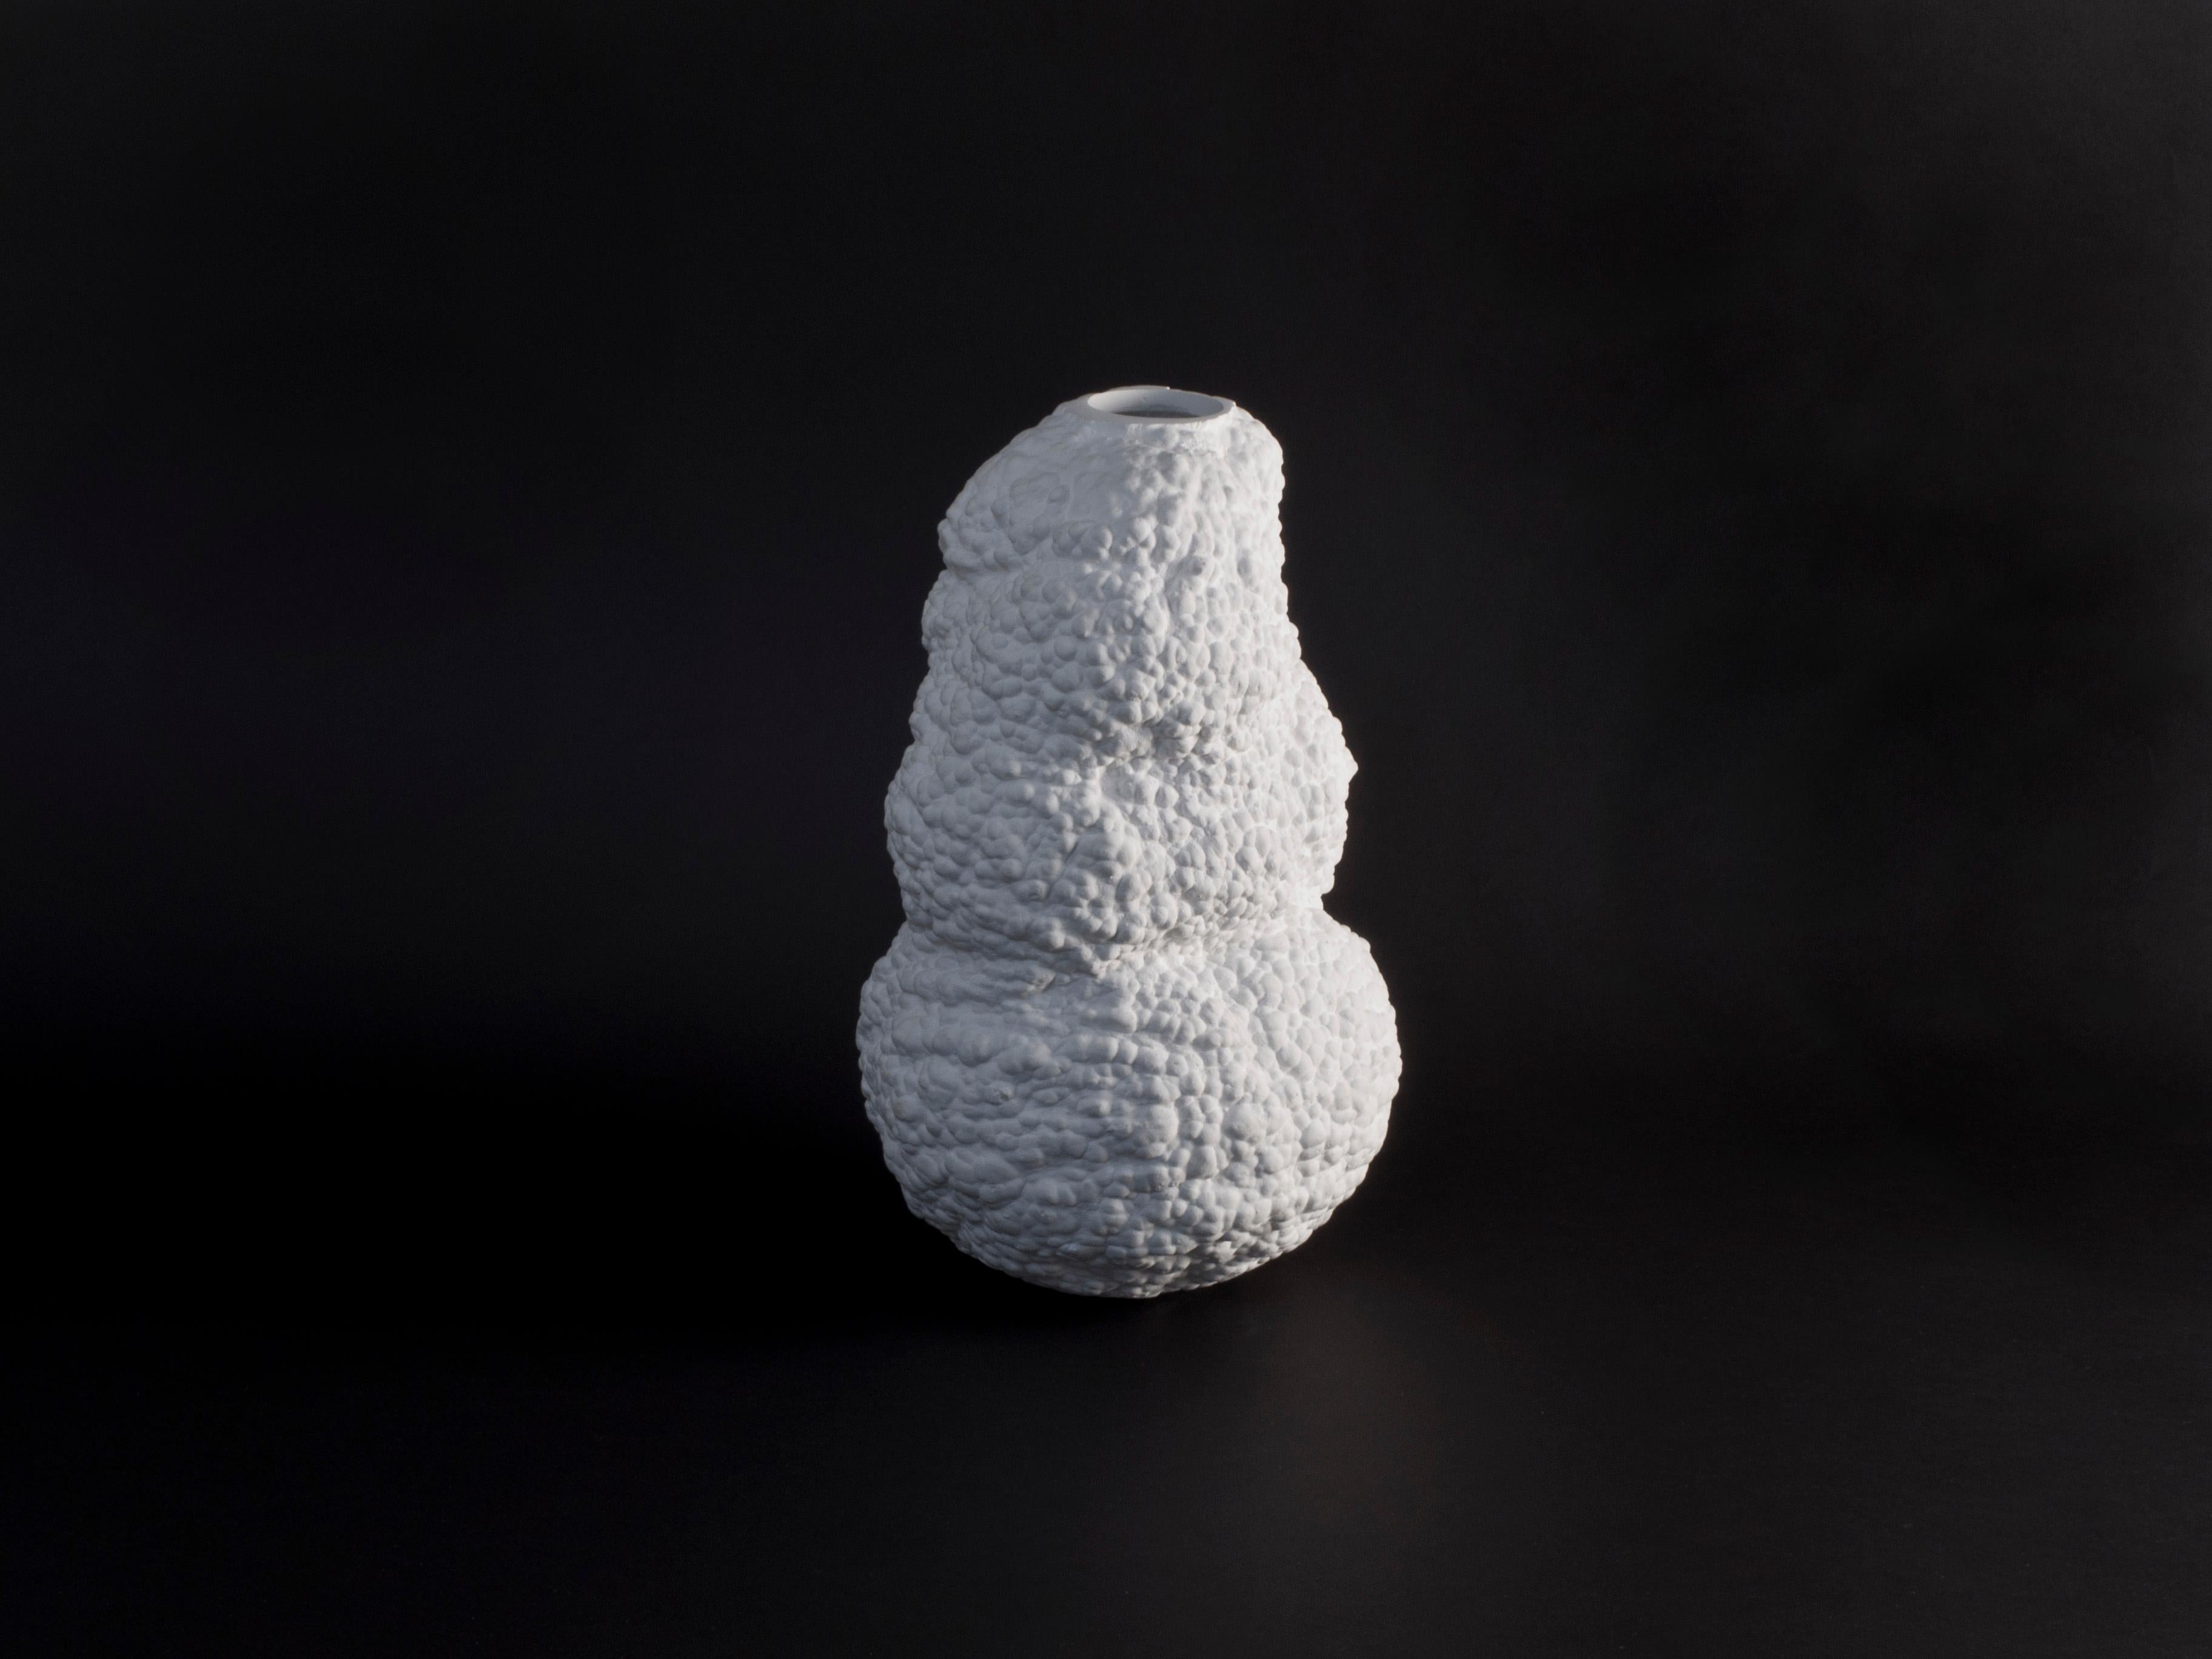 Thaw Half Litre vase by Adam Blencowe
Materials: Plaster, resin, acrylic
Dimensions: 30 x 18 x 18 cm

Thaw is a process by which the unpredictability of melting ice forms the shape and surface of a piece of furniture or object. These works